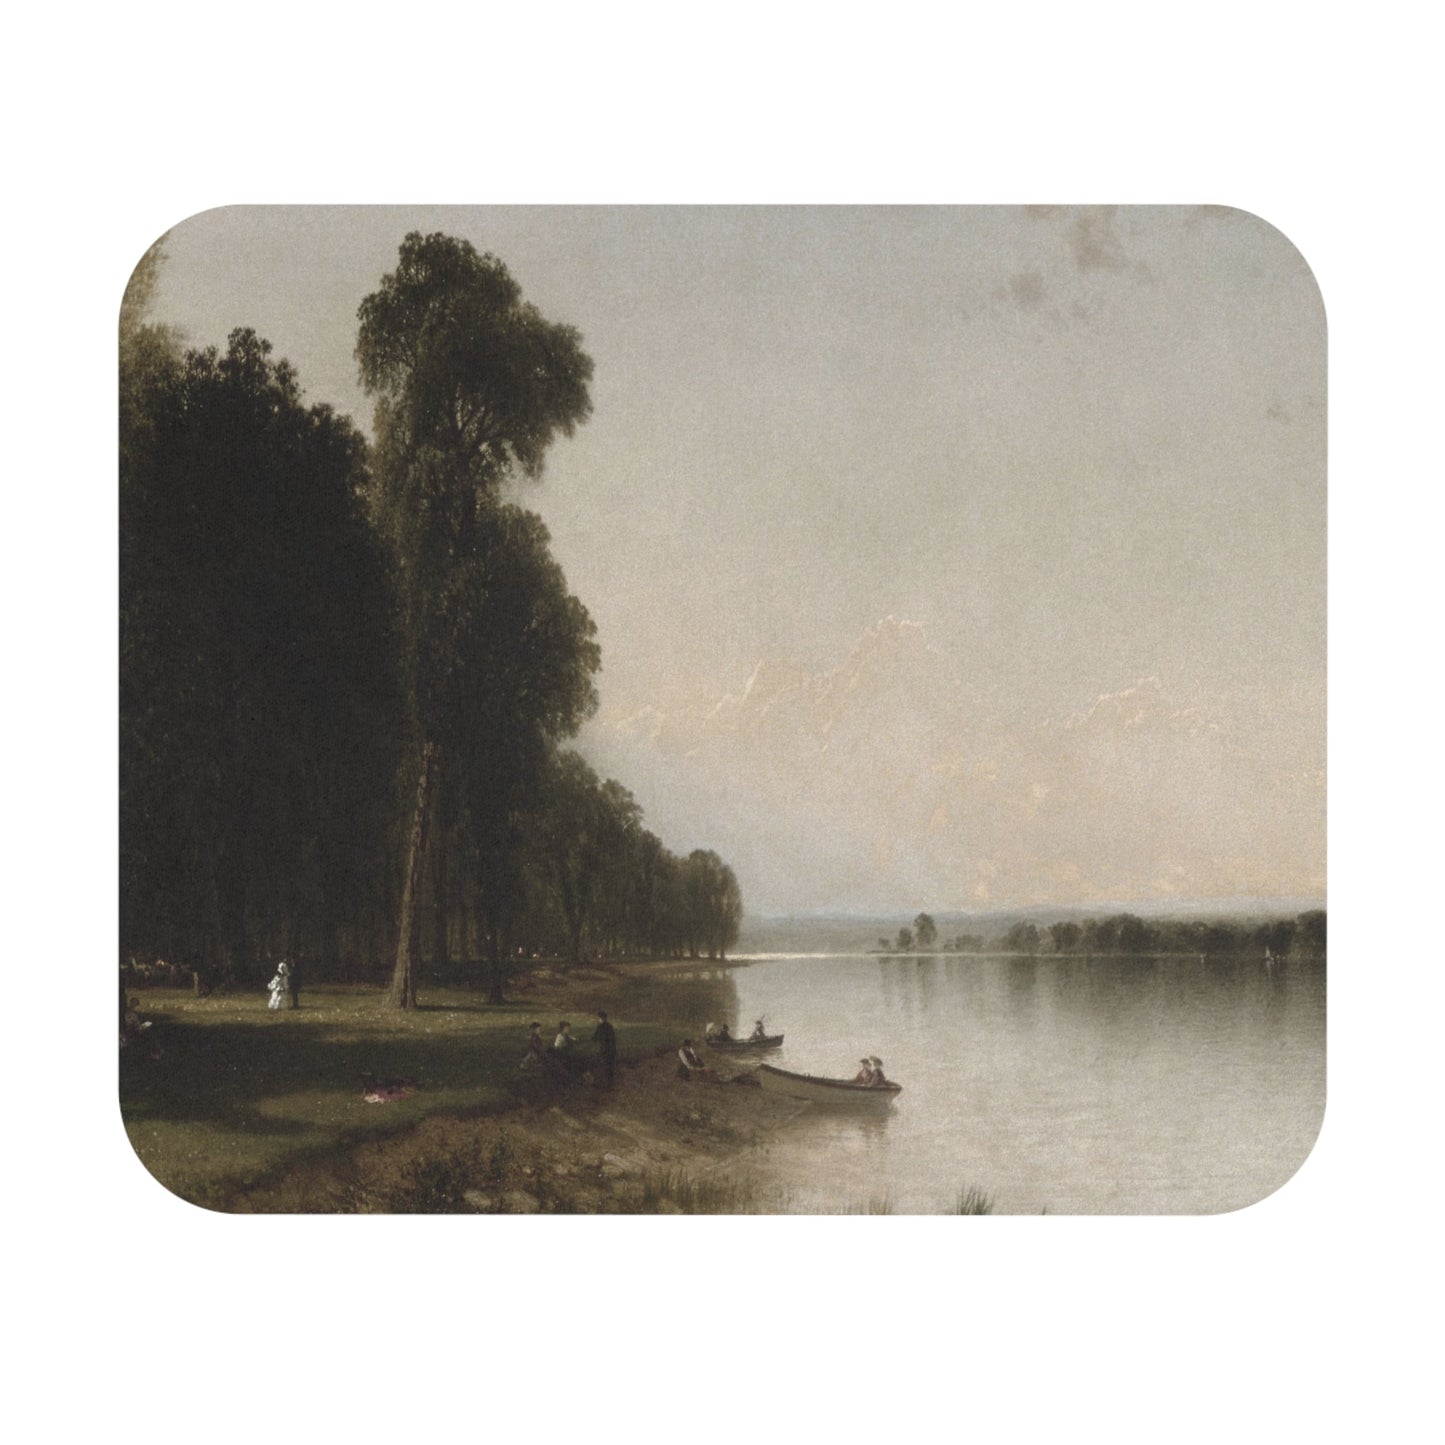 Peaceful Landscape Mouse Pad showcasing an antique lake design, ideal for desk and office decor.